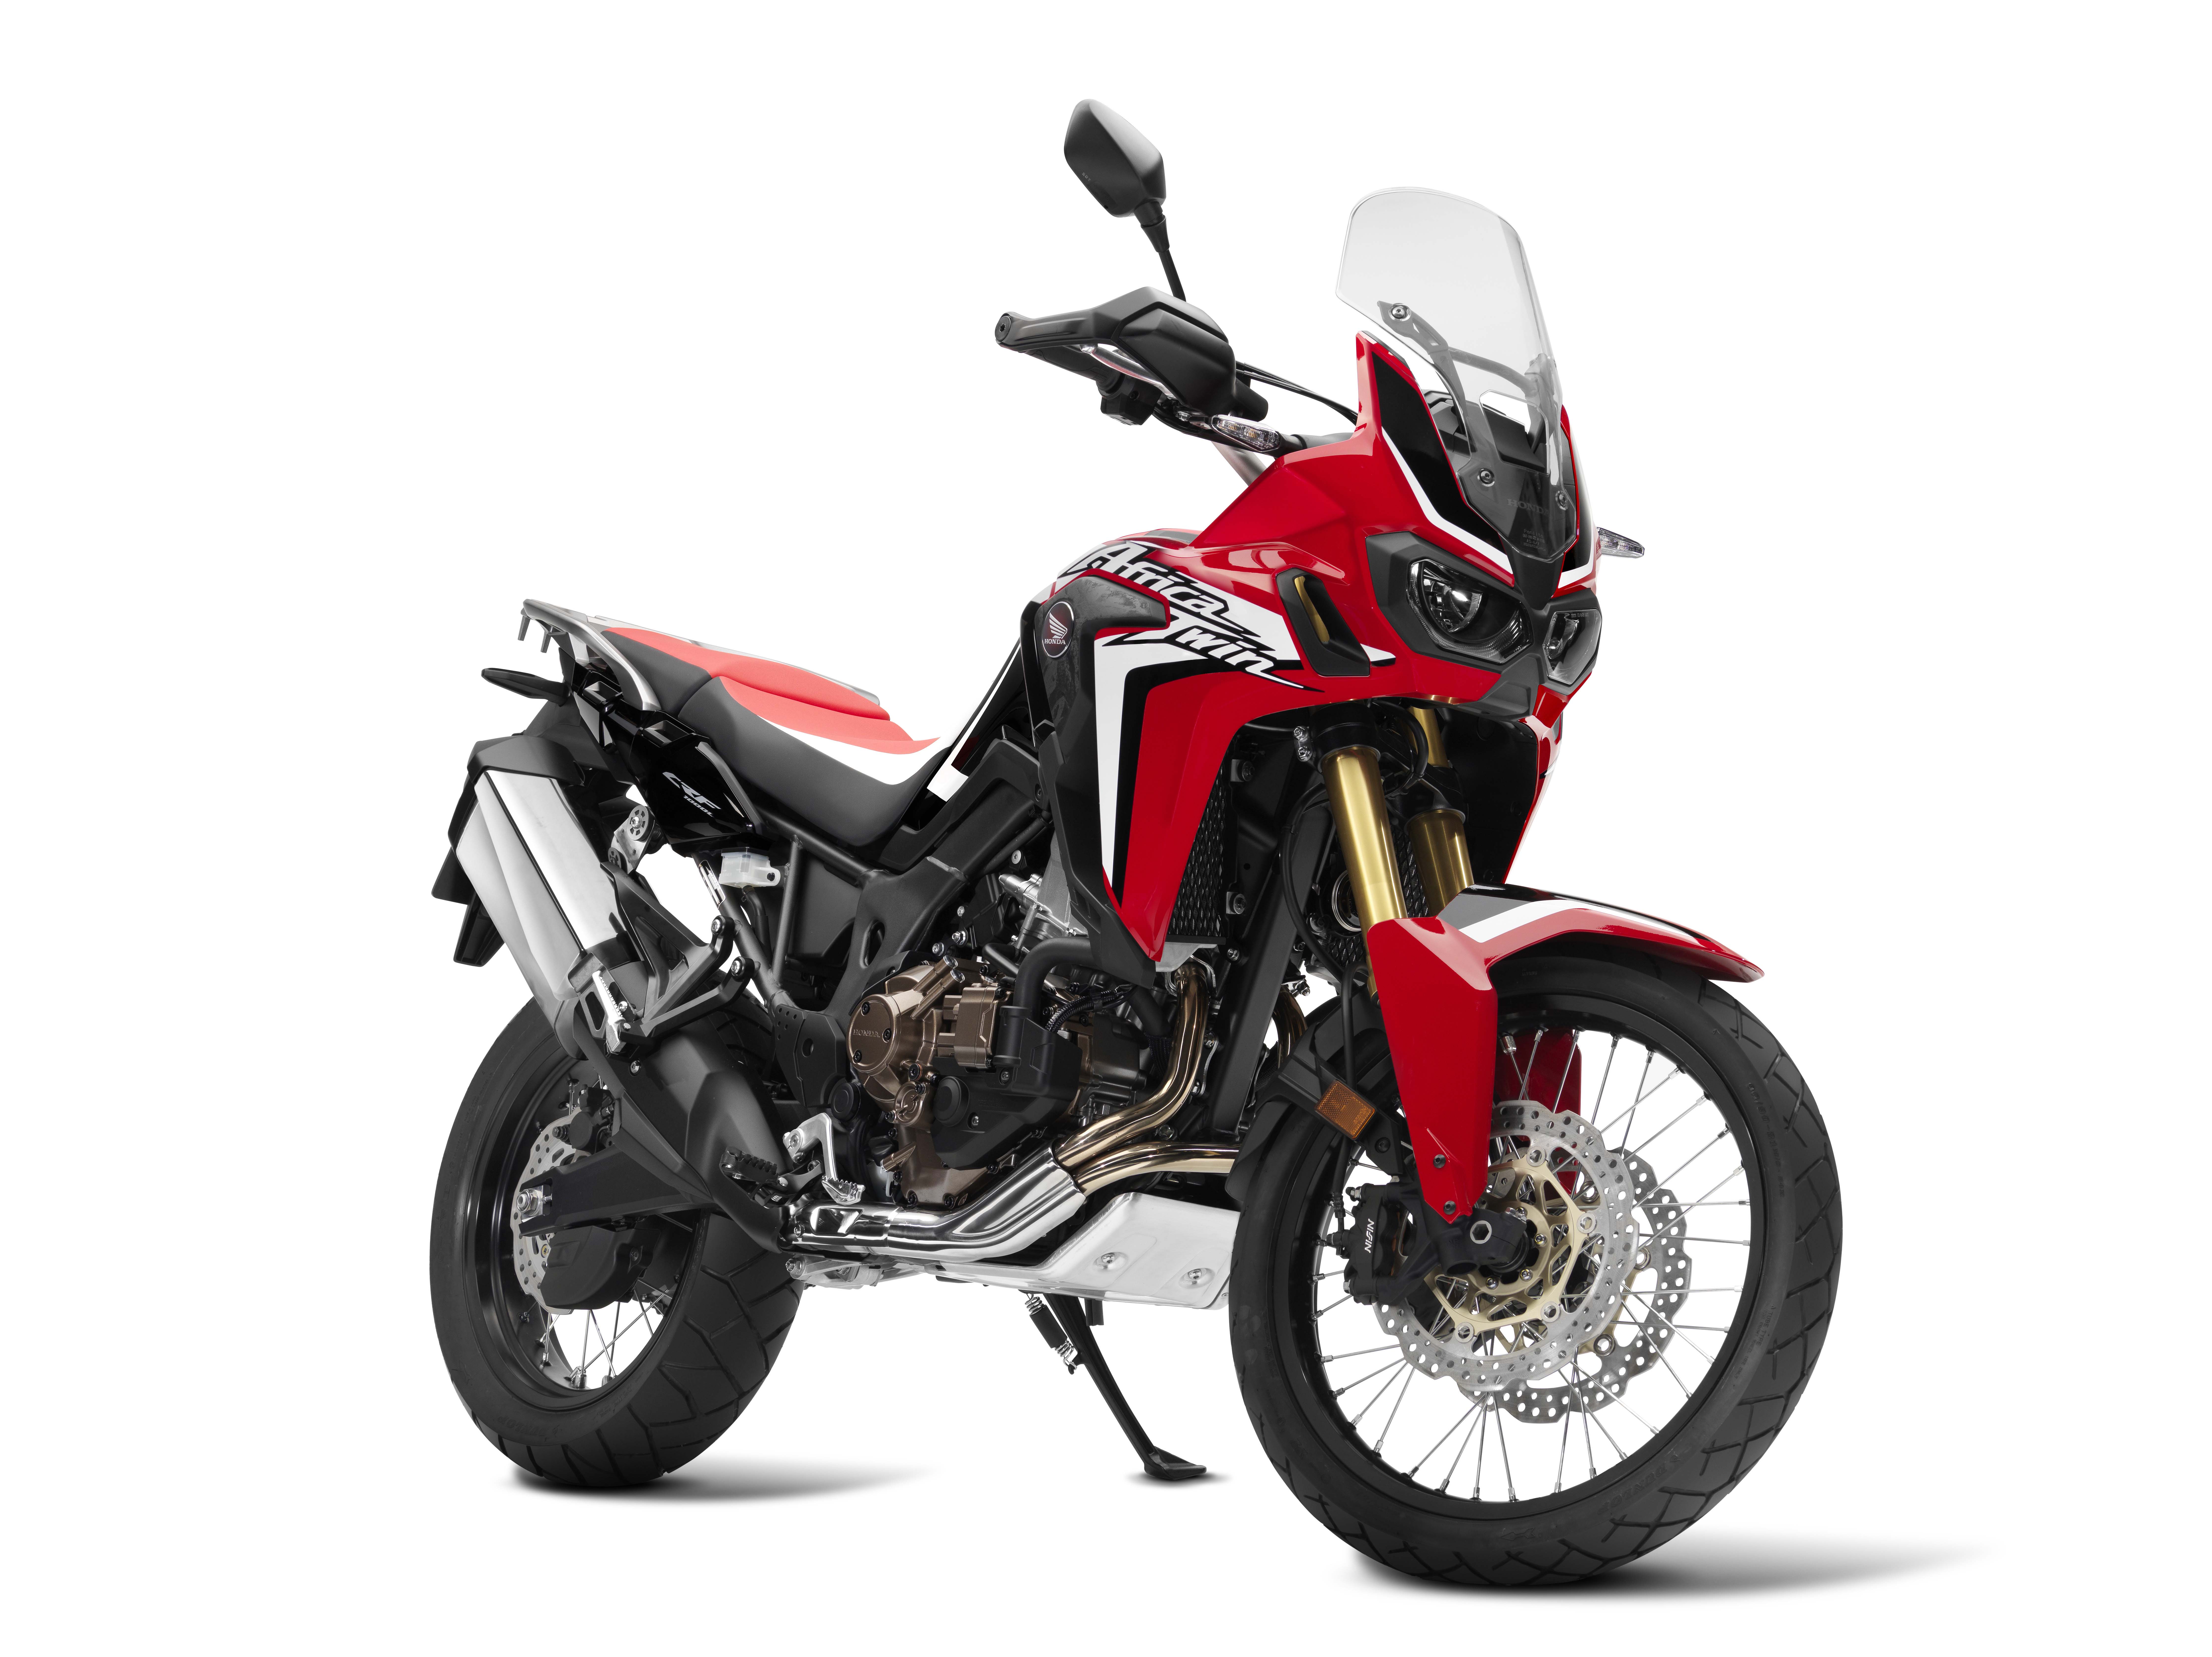 Official Details & Photos of the 2016 Honda Africa Twin